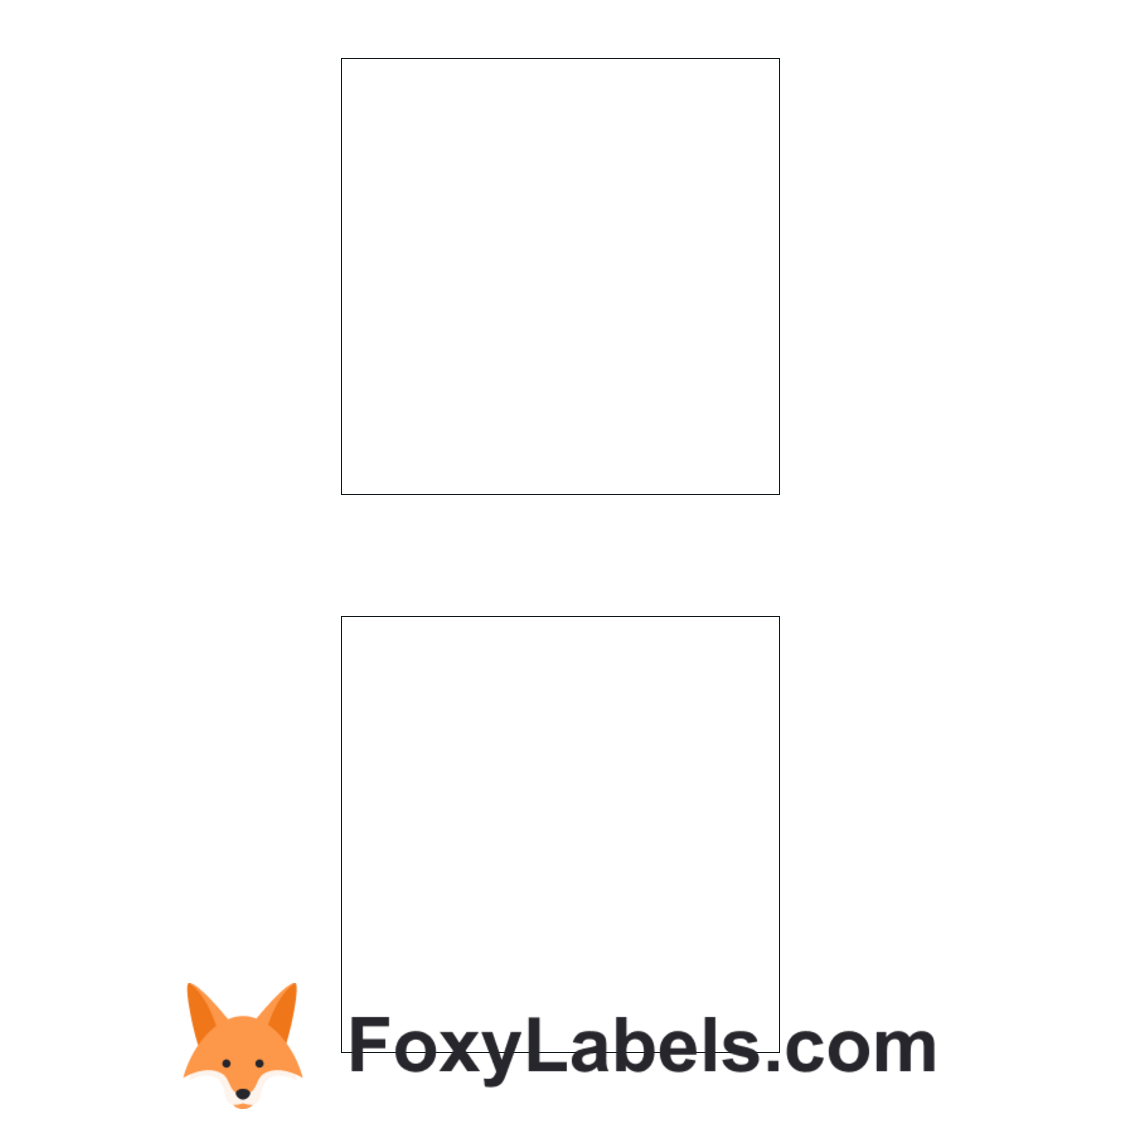 Herma 8900 label template for Google Docs